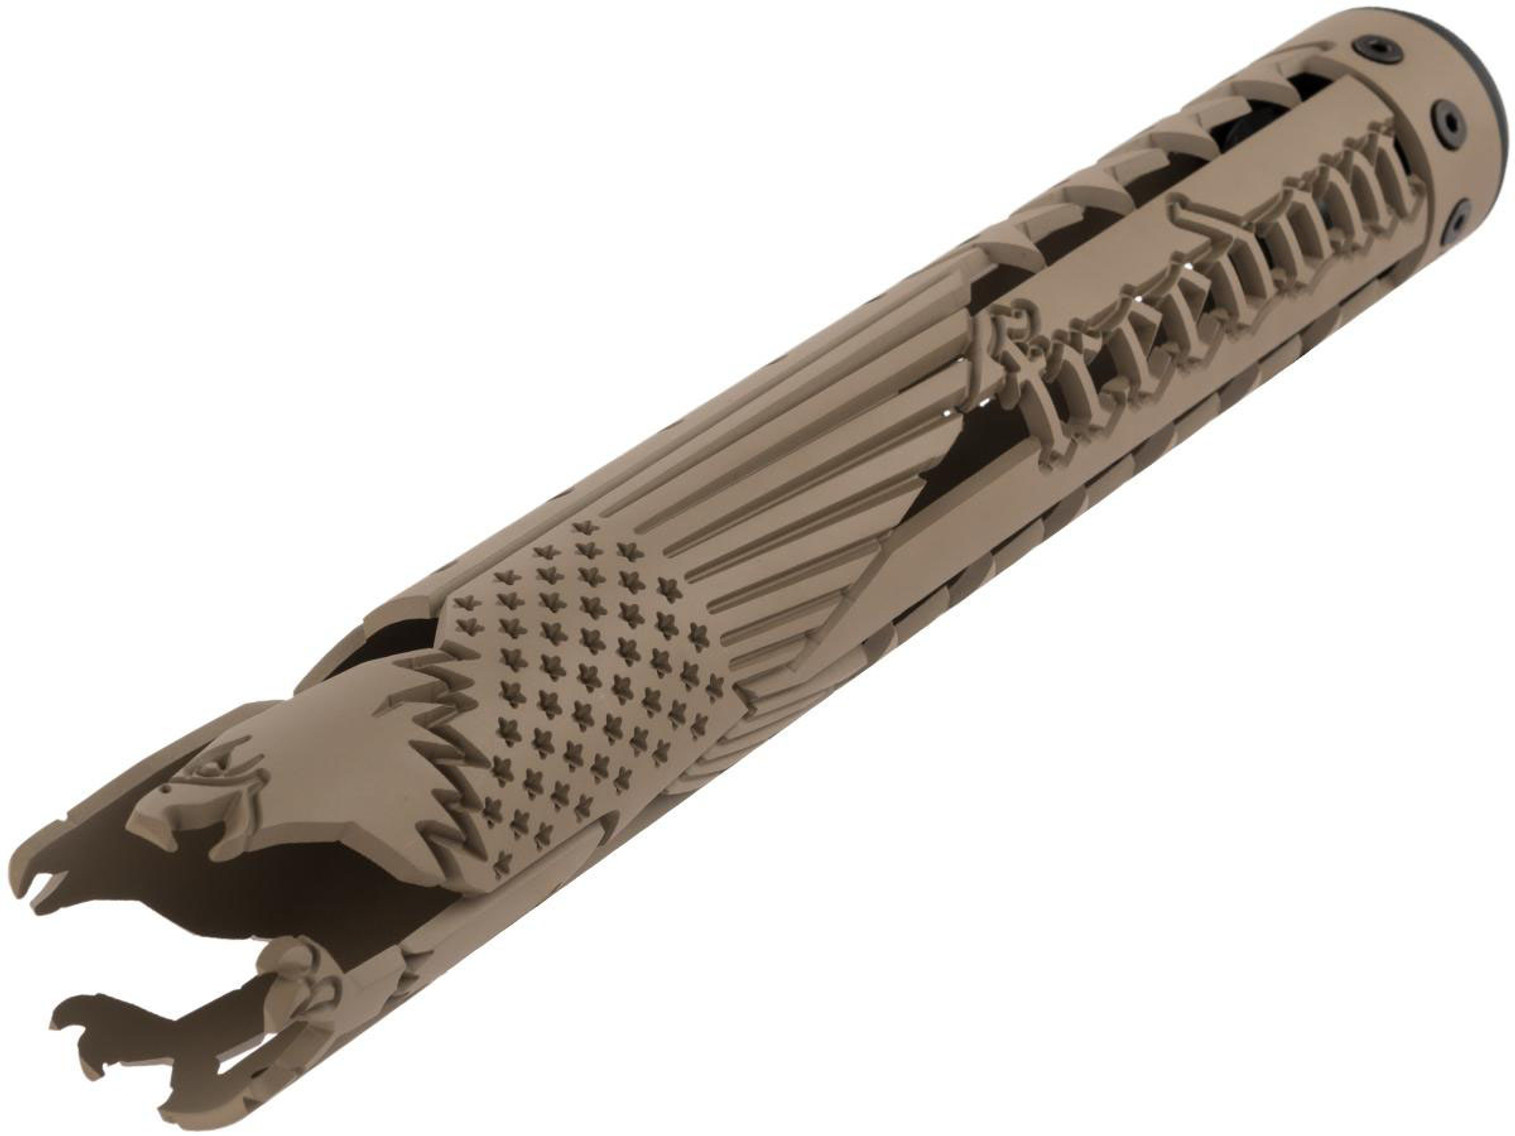 Unique ARs CNC Machined "Freedom" Handguard for AR15 Pattern Rifles (Color: Flat Dark Earth / 15" / Rail Only)